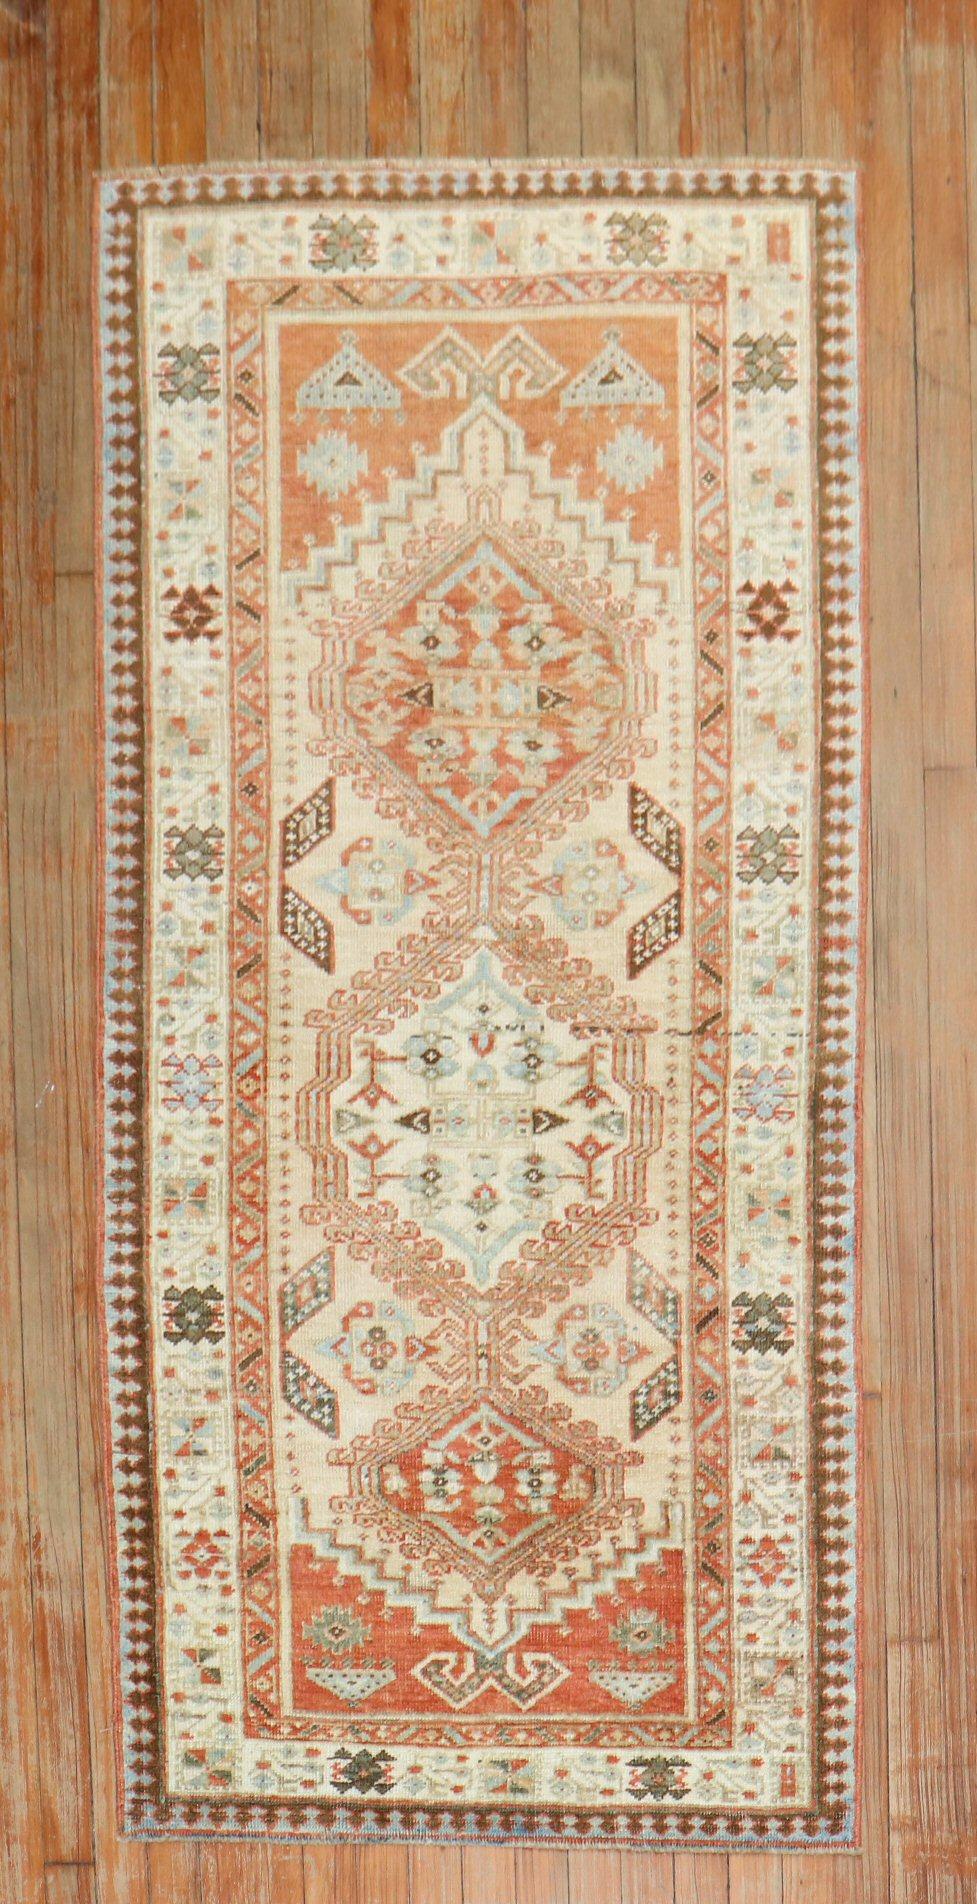 A 20th-century tribal highly decorative Persian Serab short runner. Great quality and in great condition.

Measures: 2'10